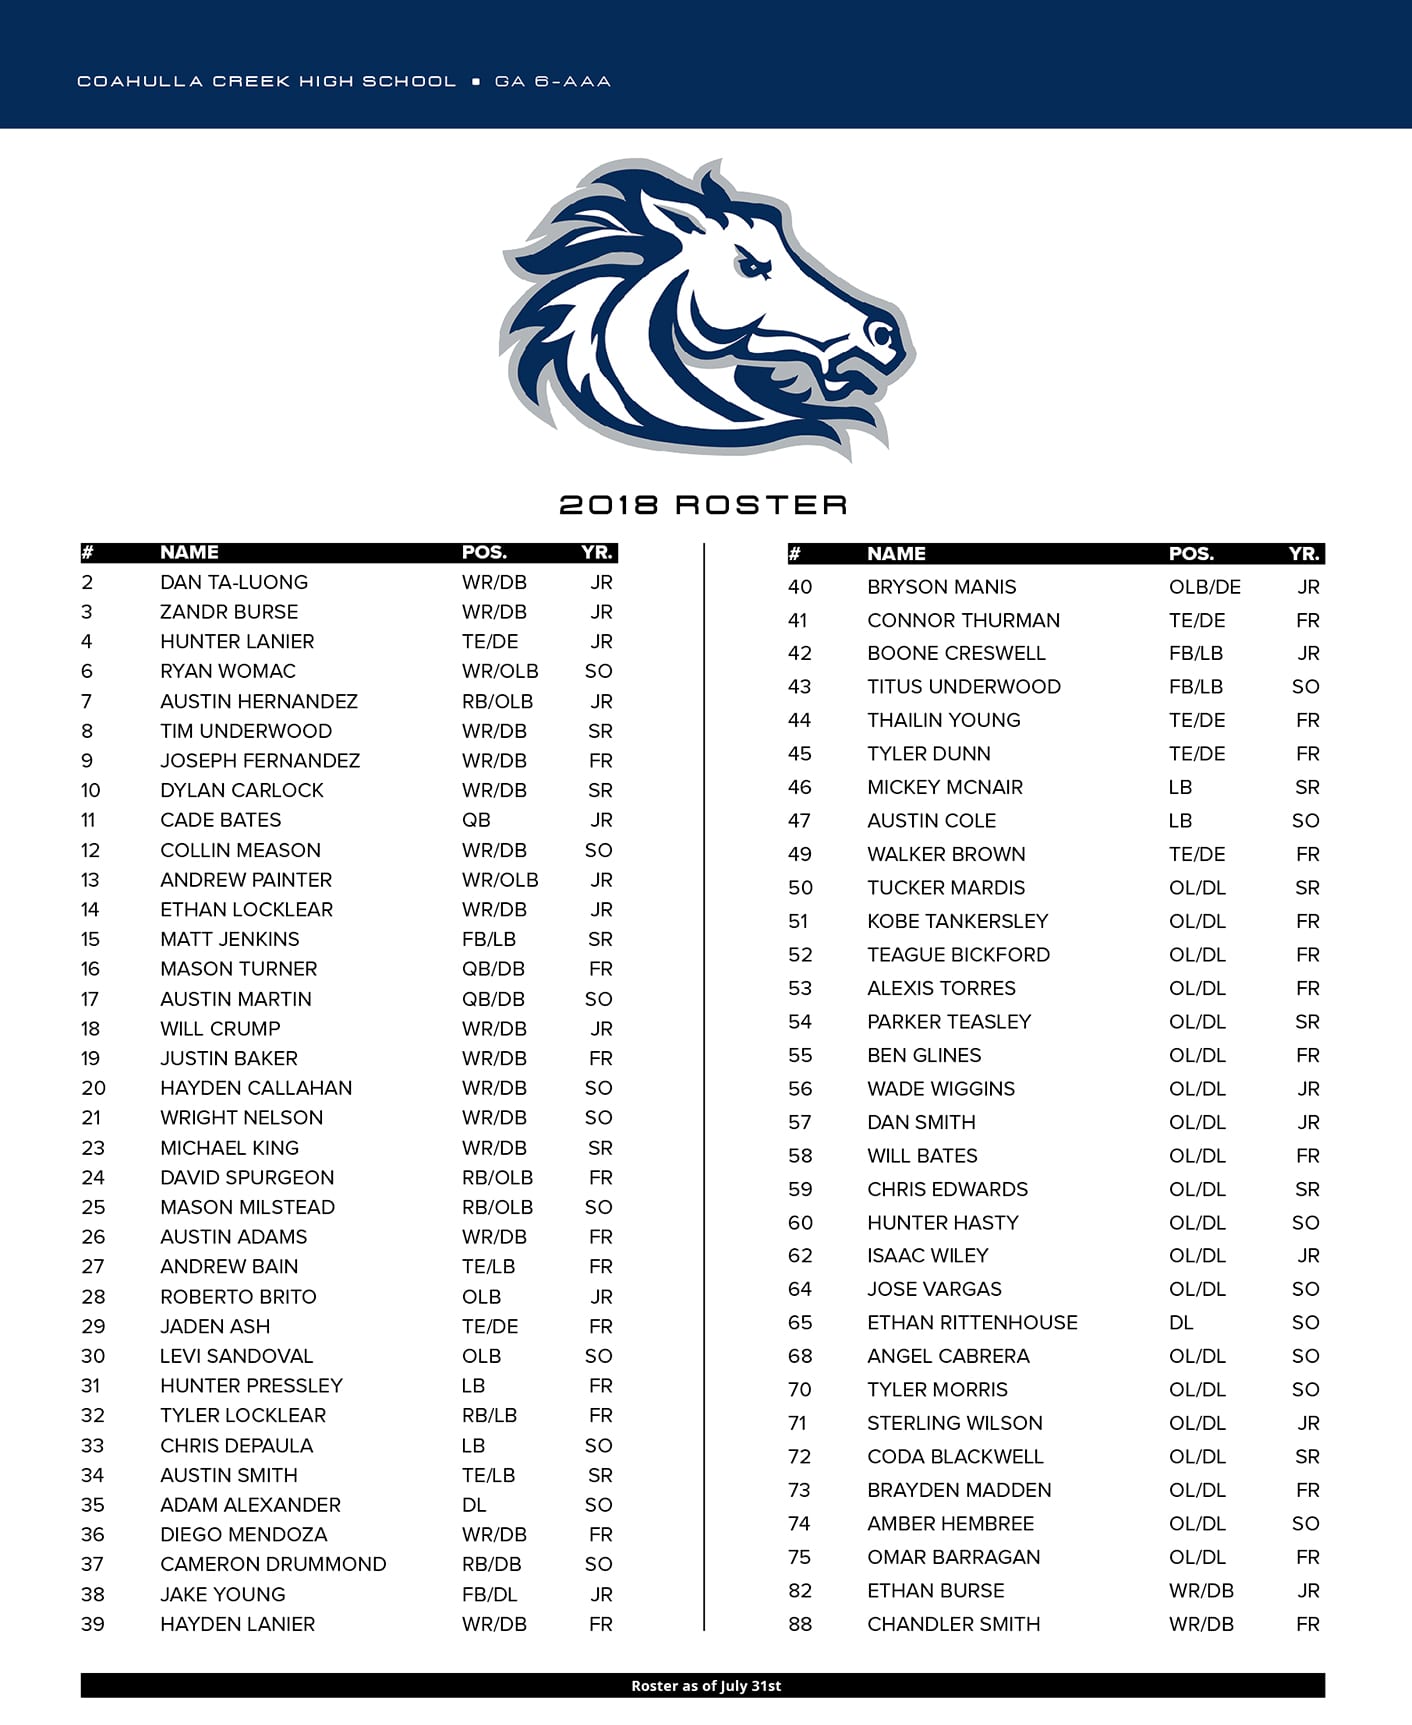 Coahulla Creek High School Football 2018 roster in Chattanooga